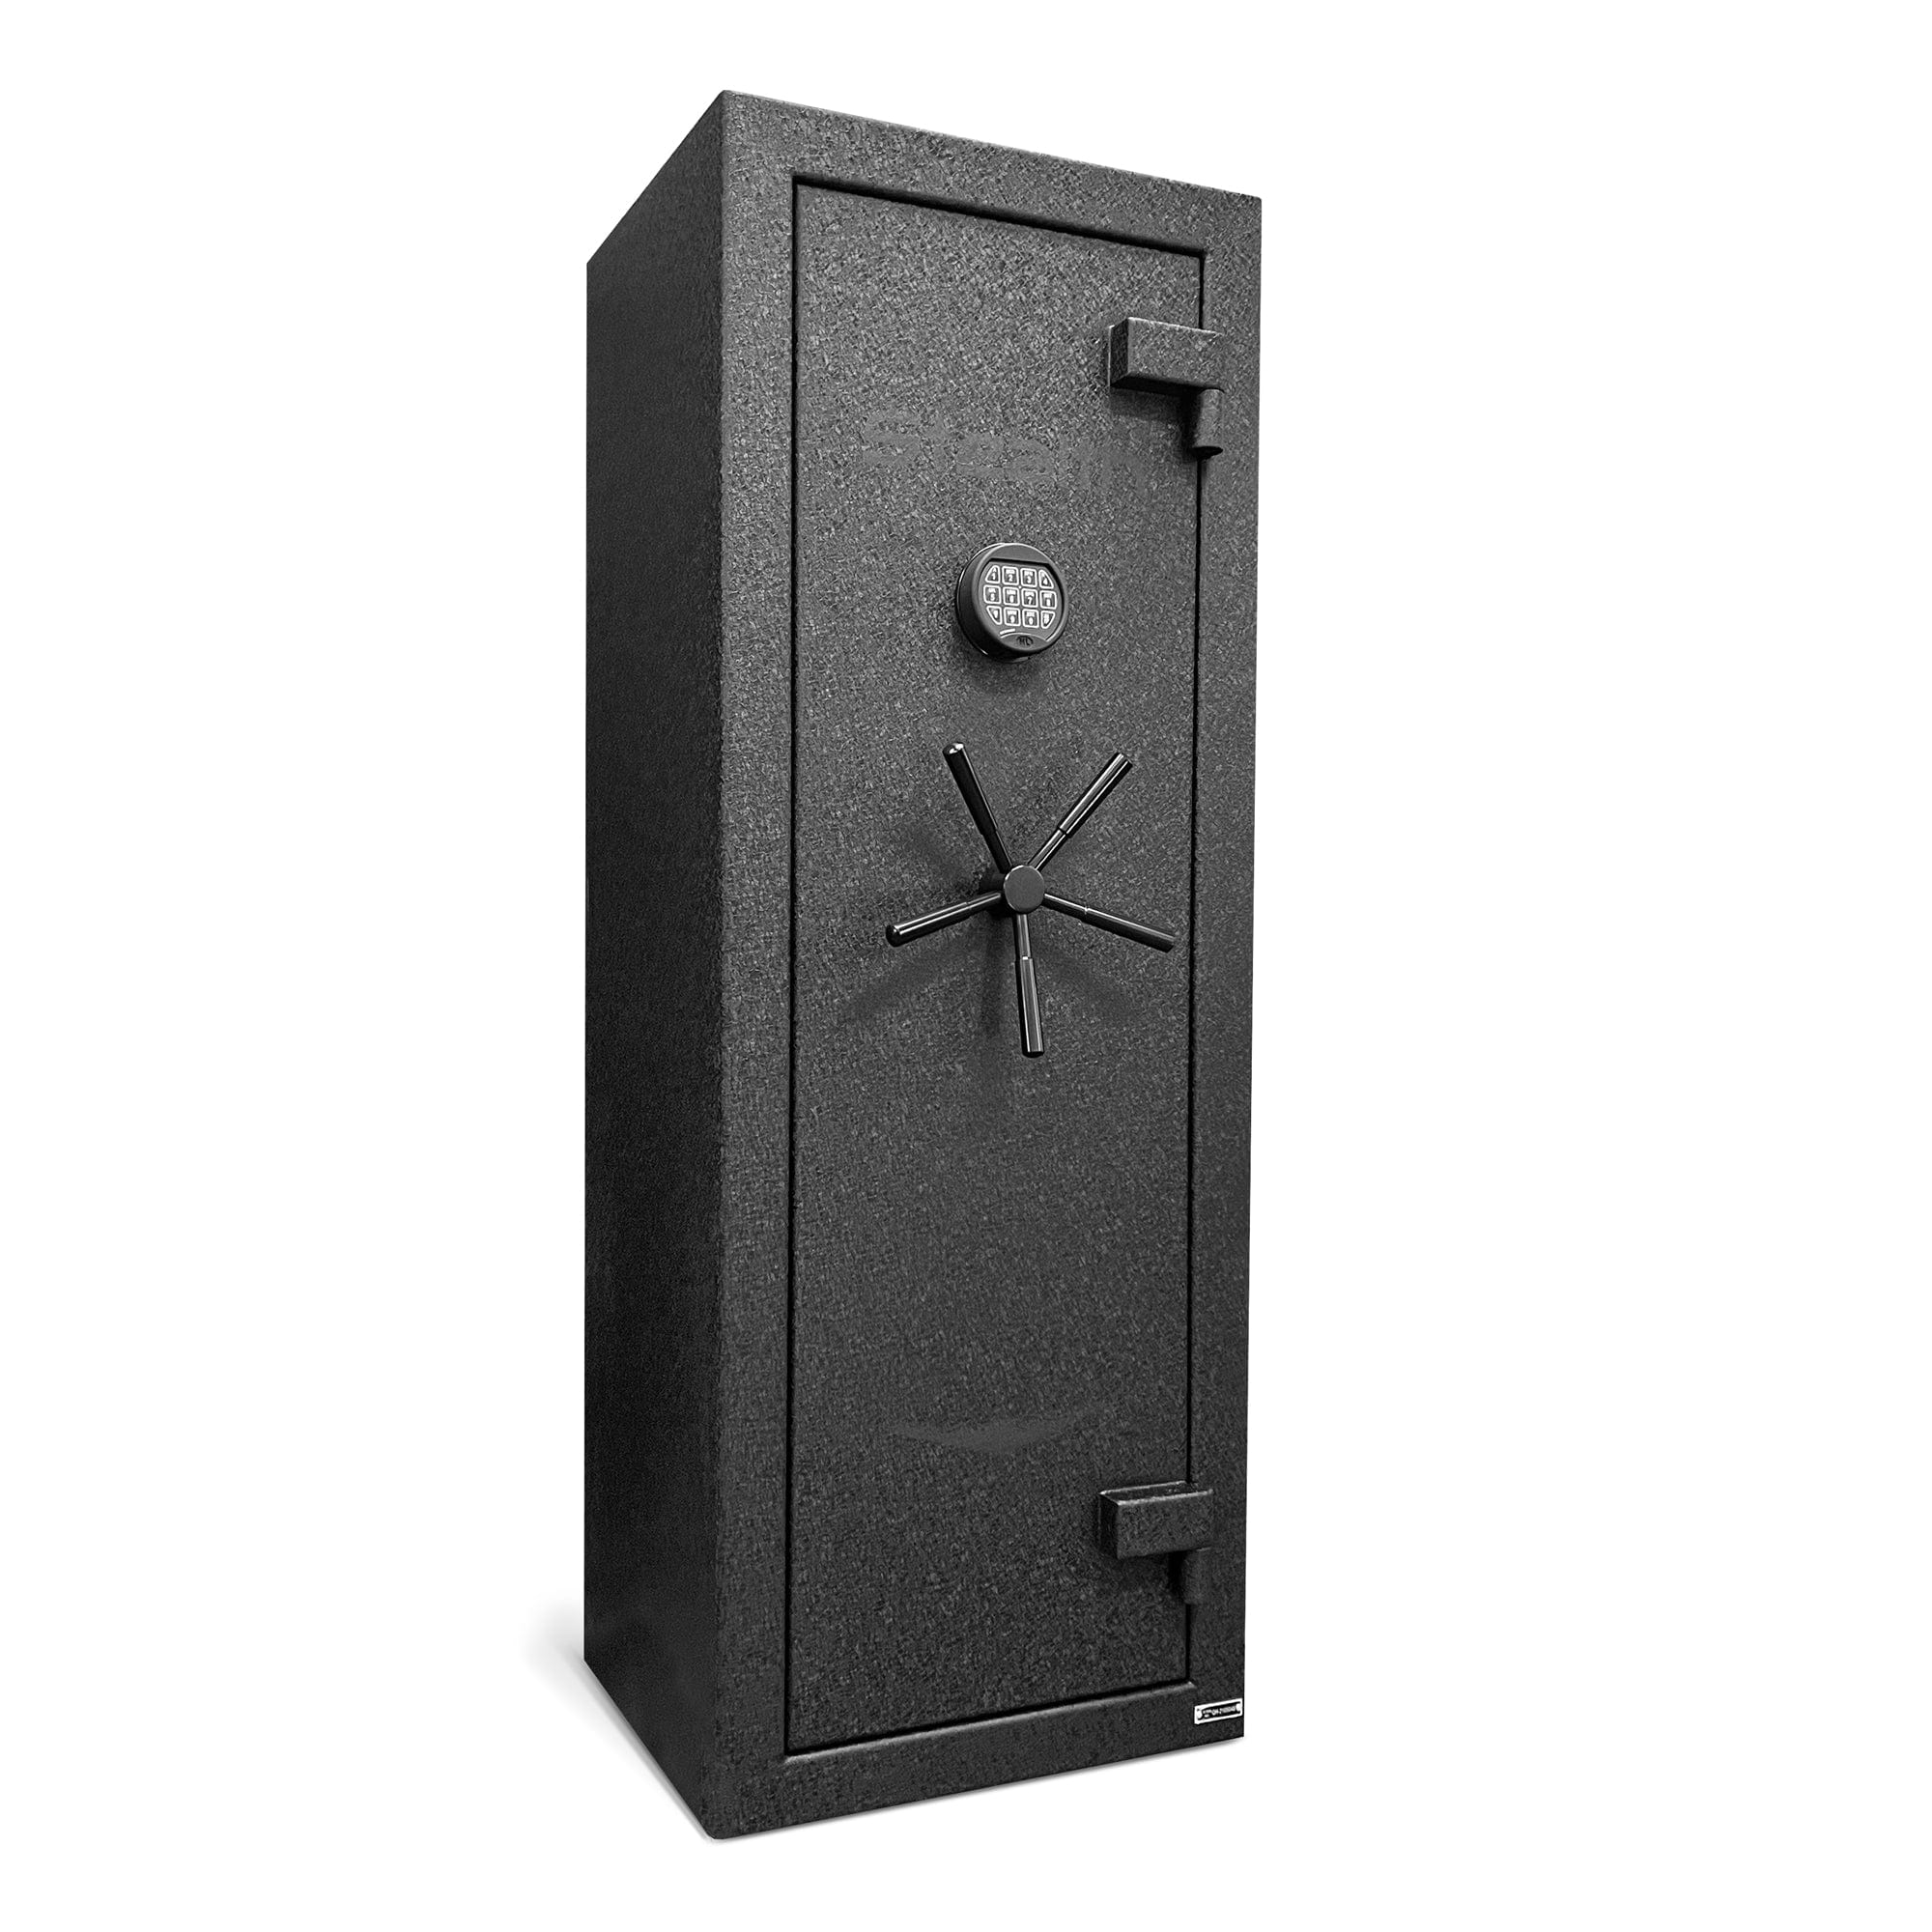 Unbreakable Safes: Tales of Impenetrability from Famous Heists